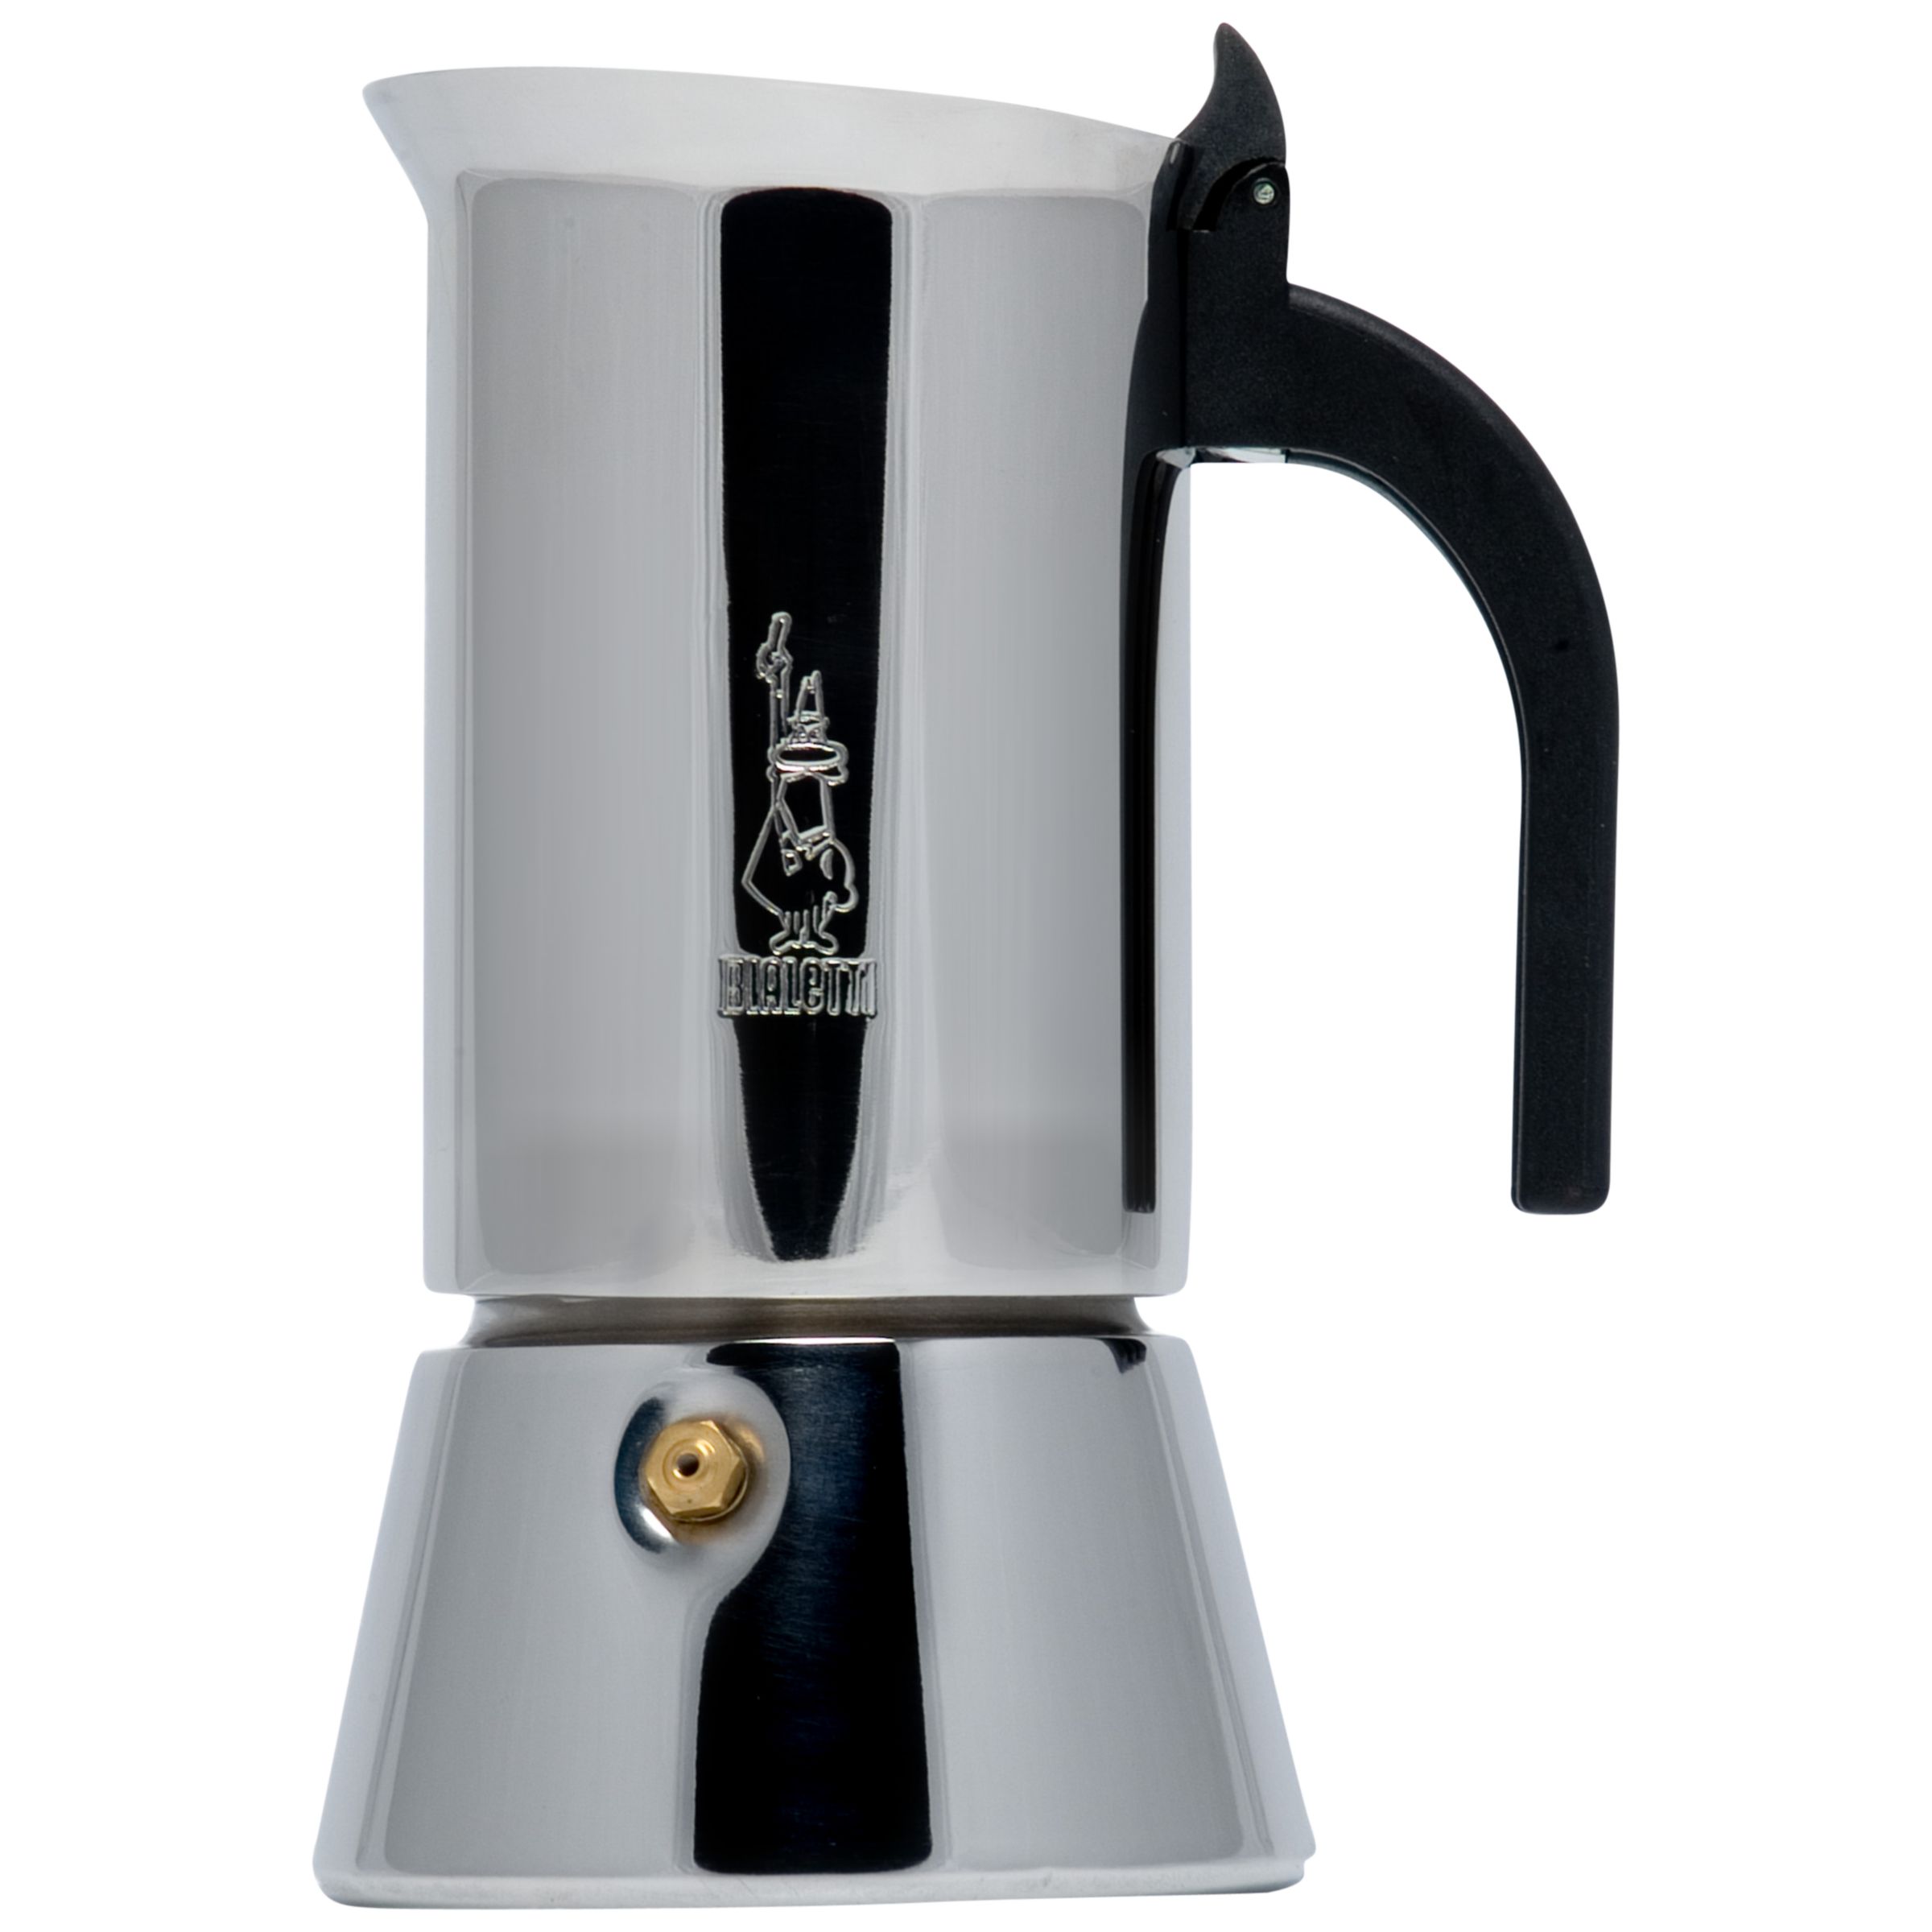 Bialetti Moka Induction Stovetop Espresso Maker 4 Cup / 6 Cup - Two Chimps  Coffee